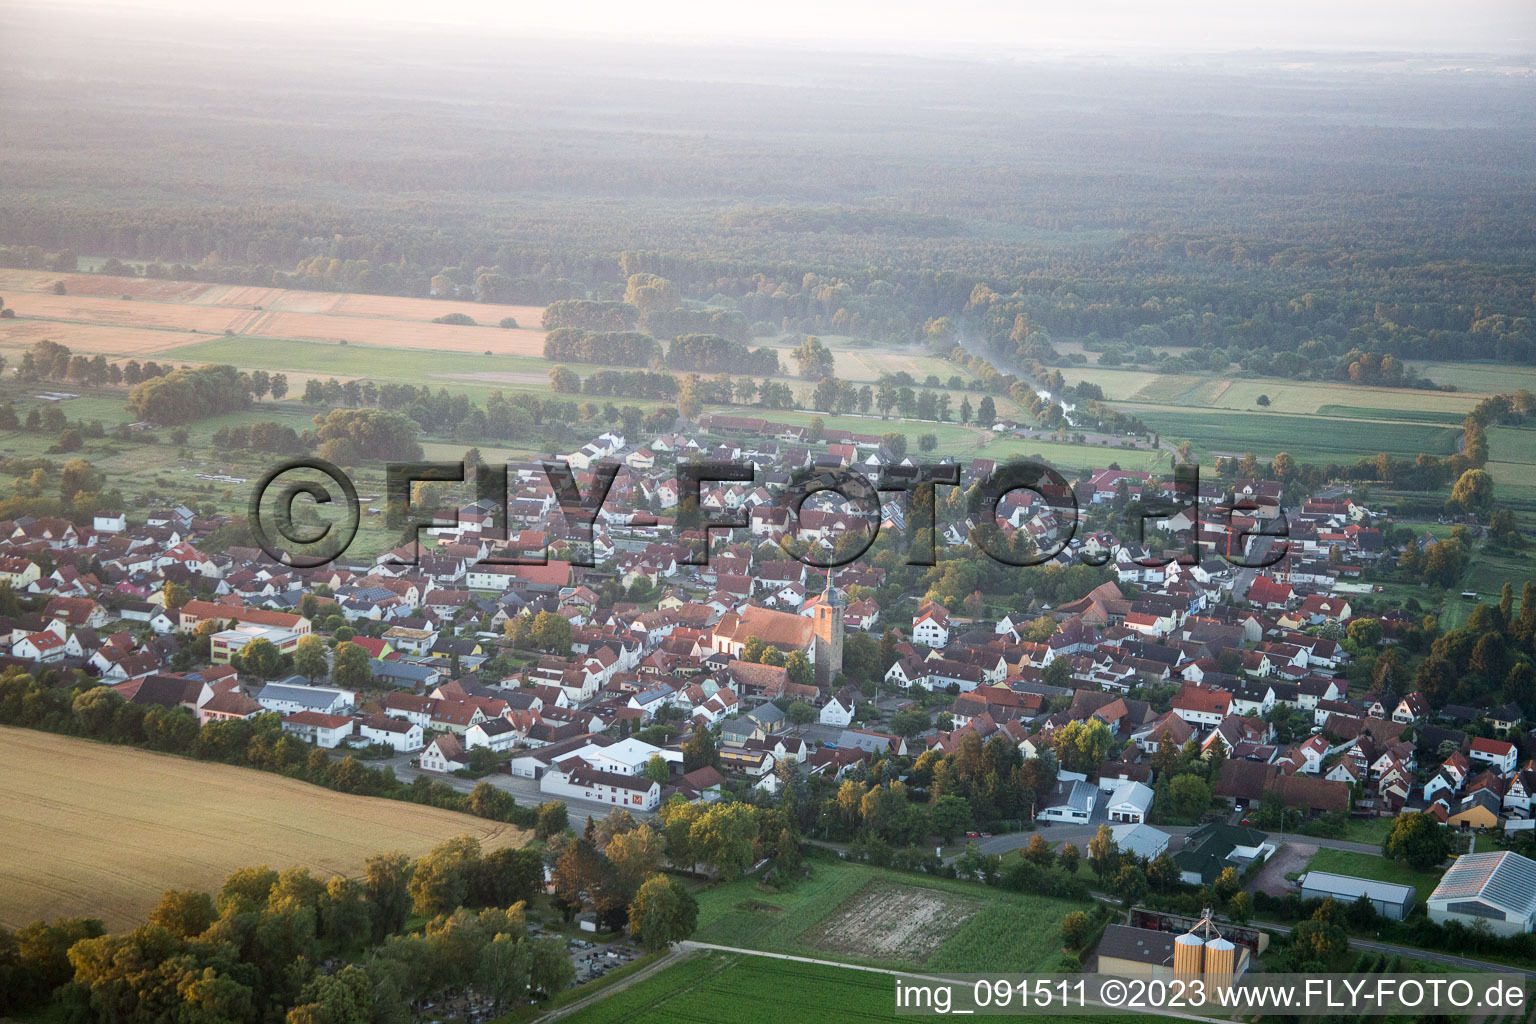 Steinfeld in the state Rhineland-Palatinate, Germany seen from a drone